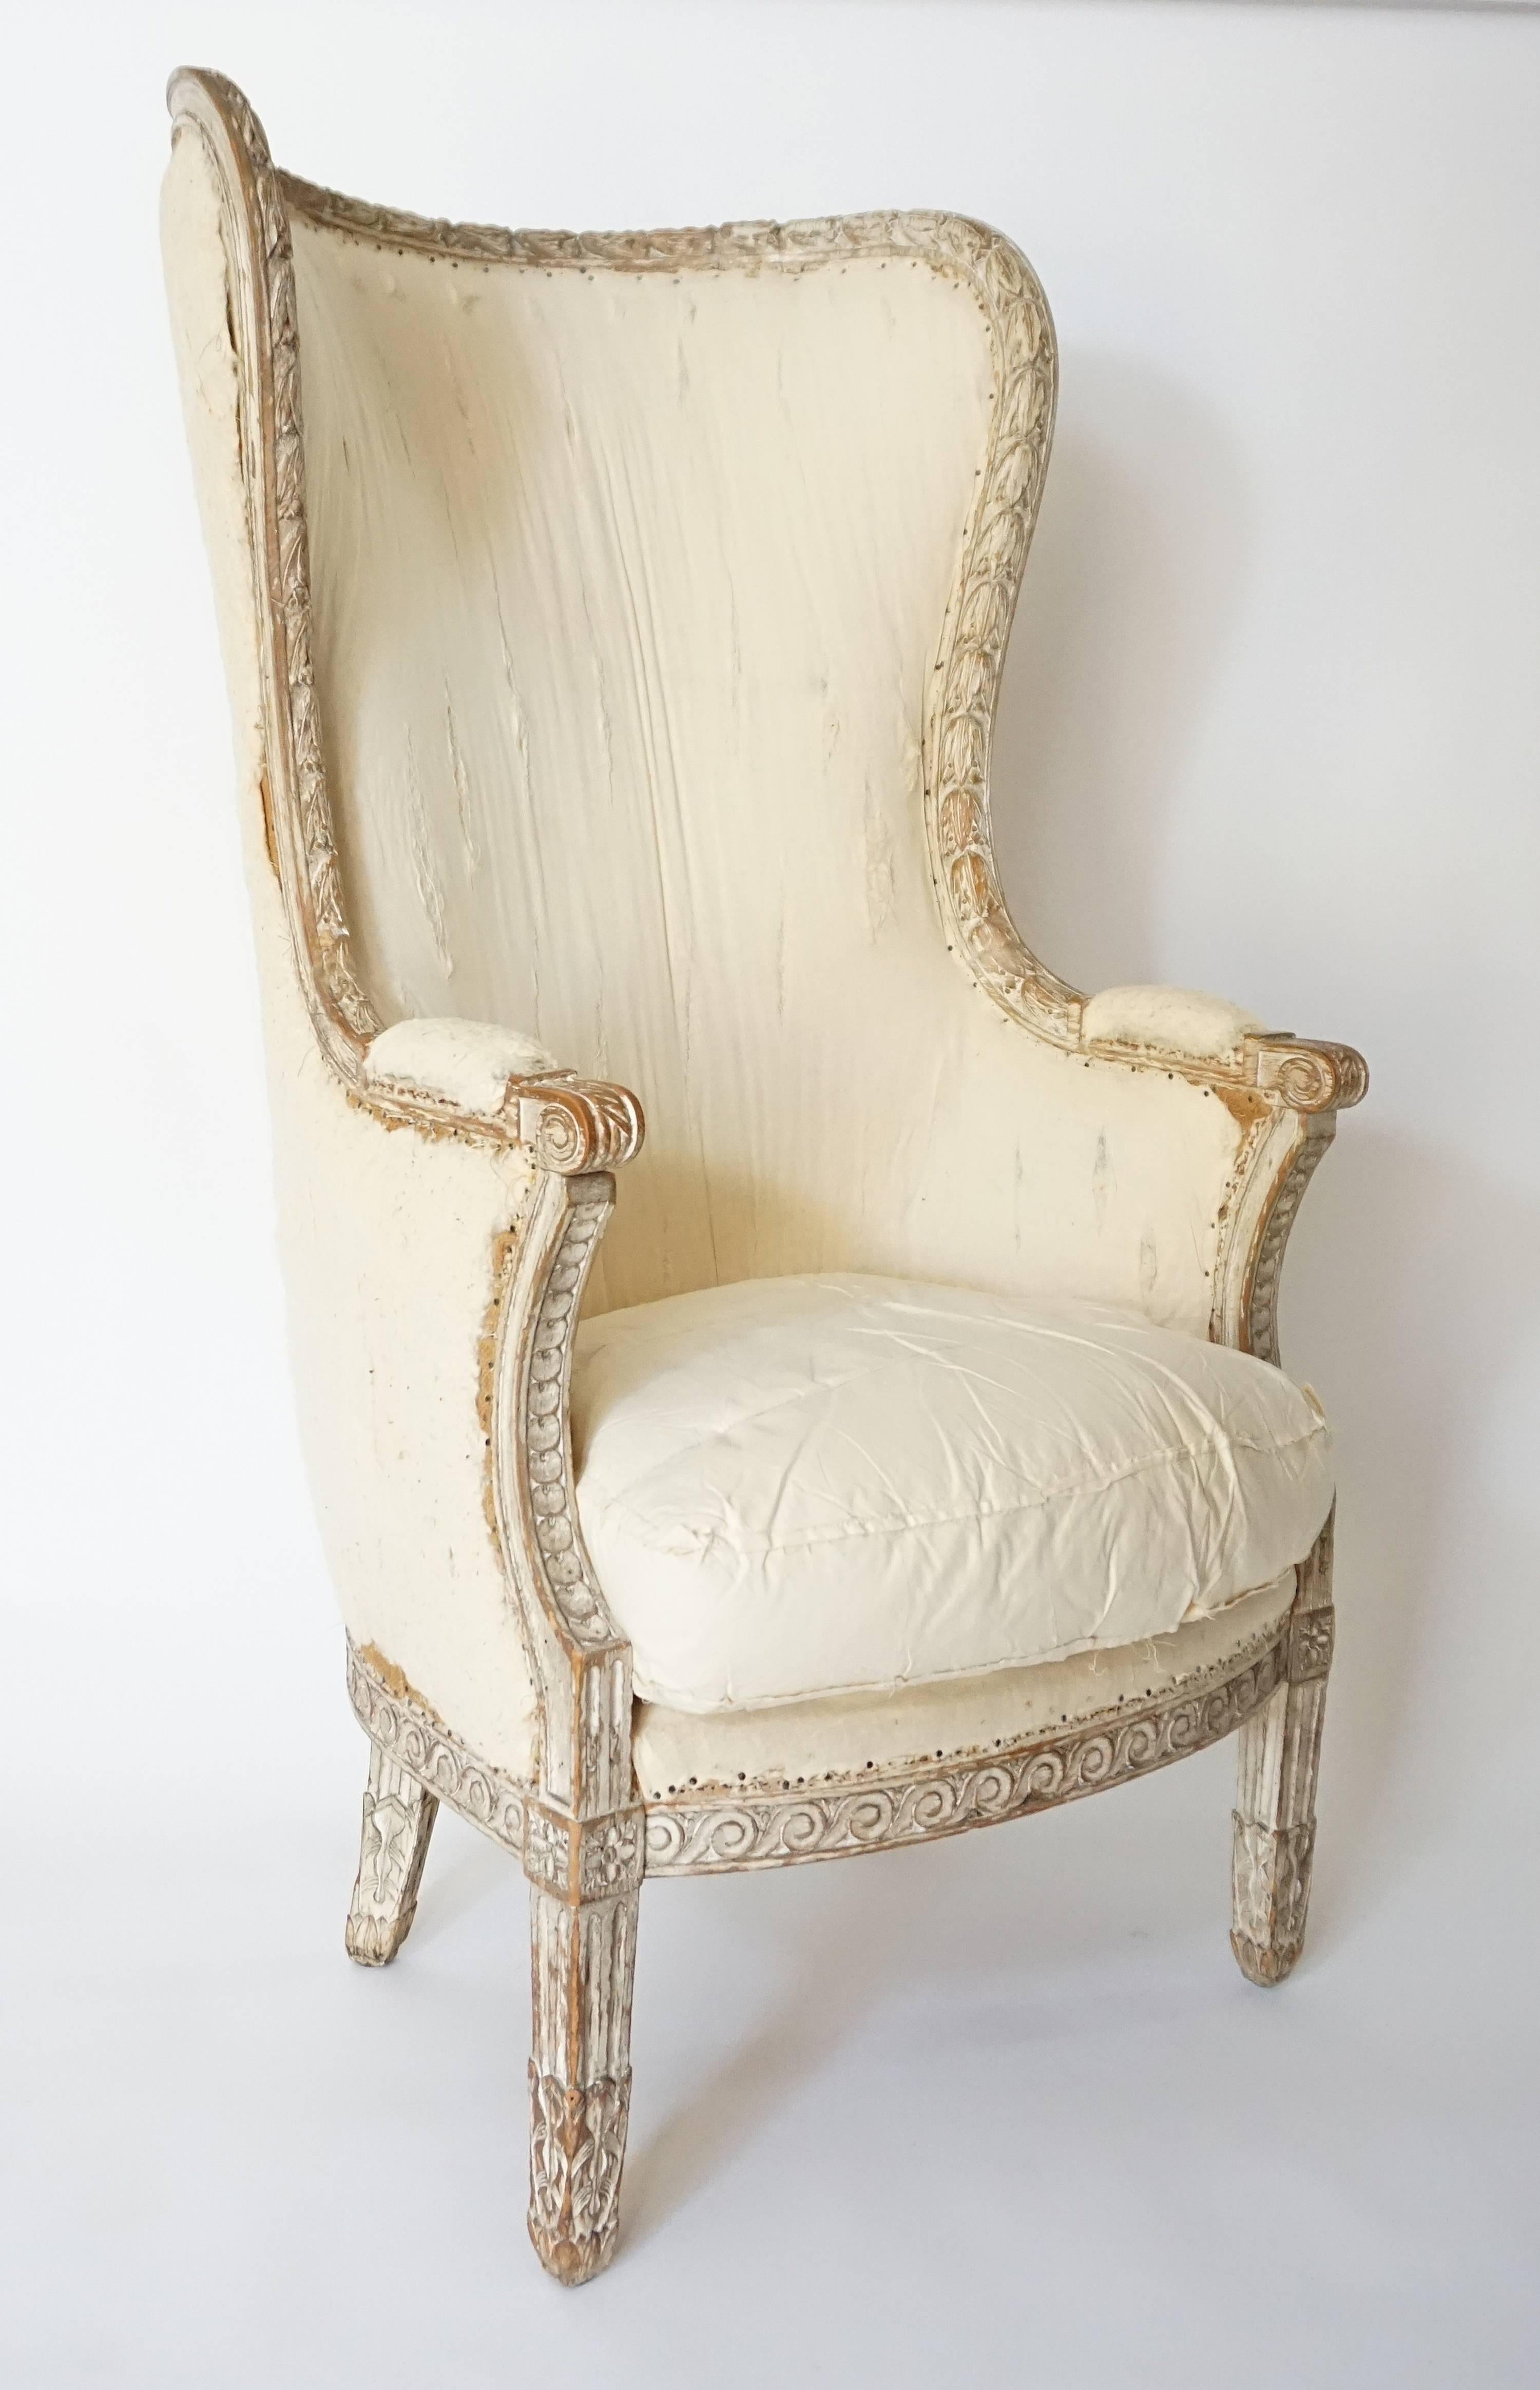 An exceptional circa 1770 French, Louis XVI period bergère a' oreilles or wingback with back, arms, seat, and down-filled squab cushion upholstered and original painted frame with carved acanthus garland border around curved wing-back terminating